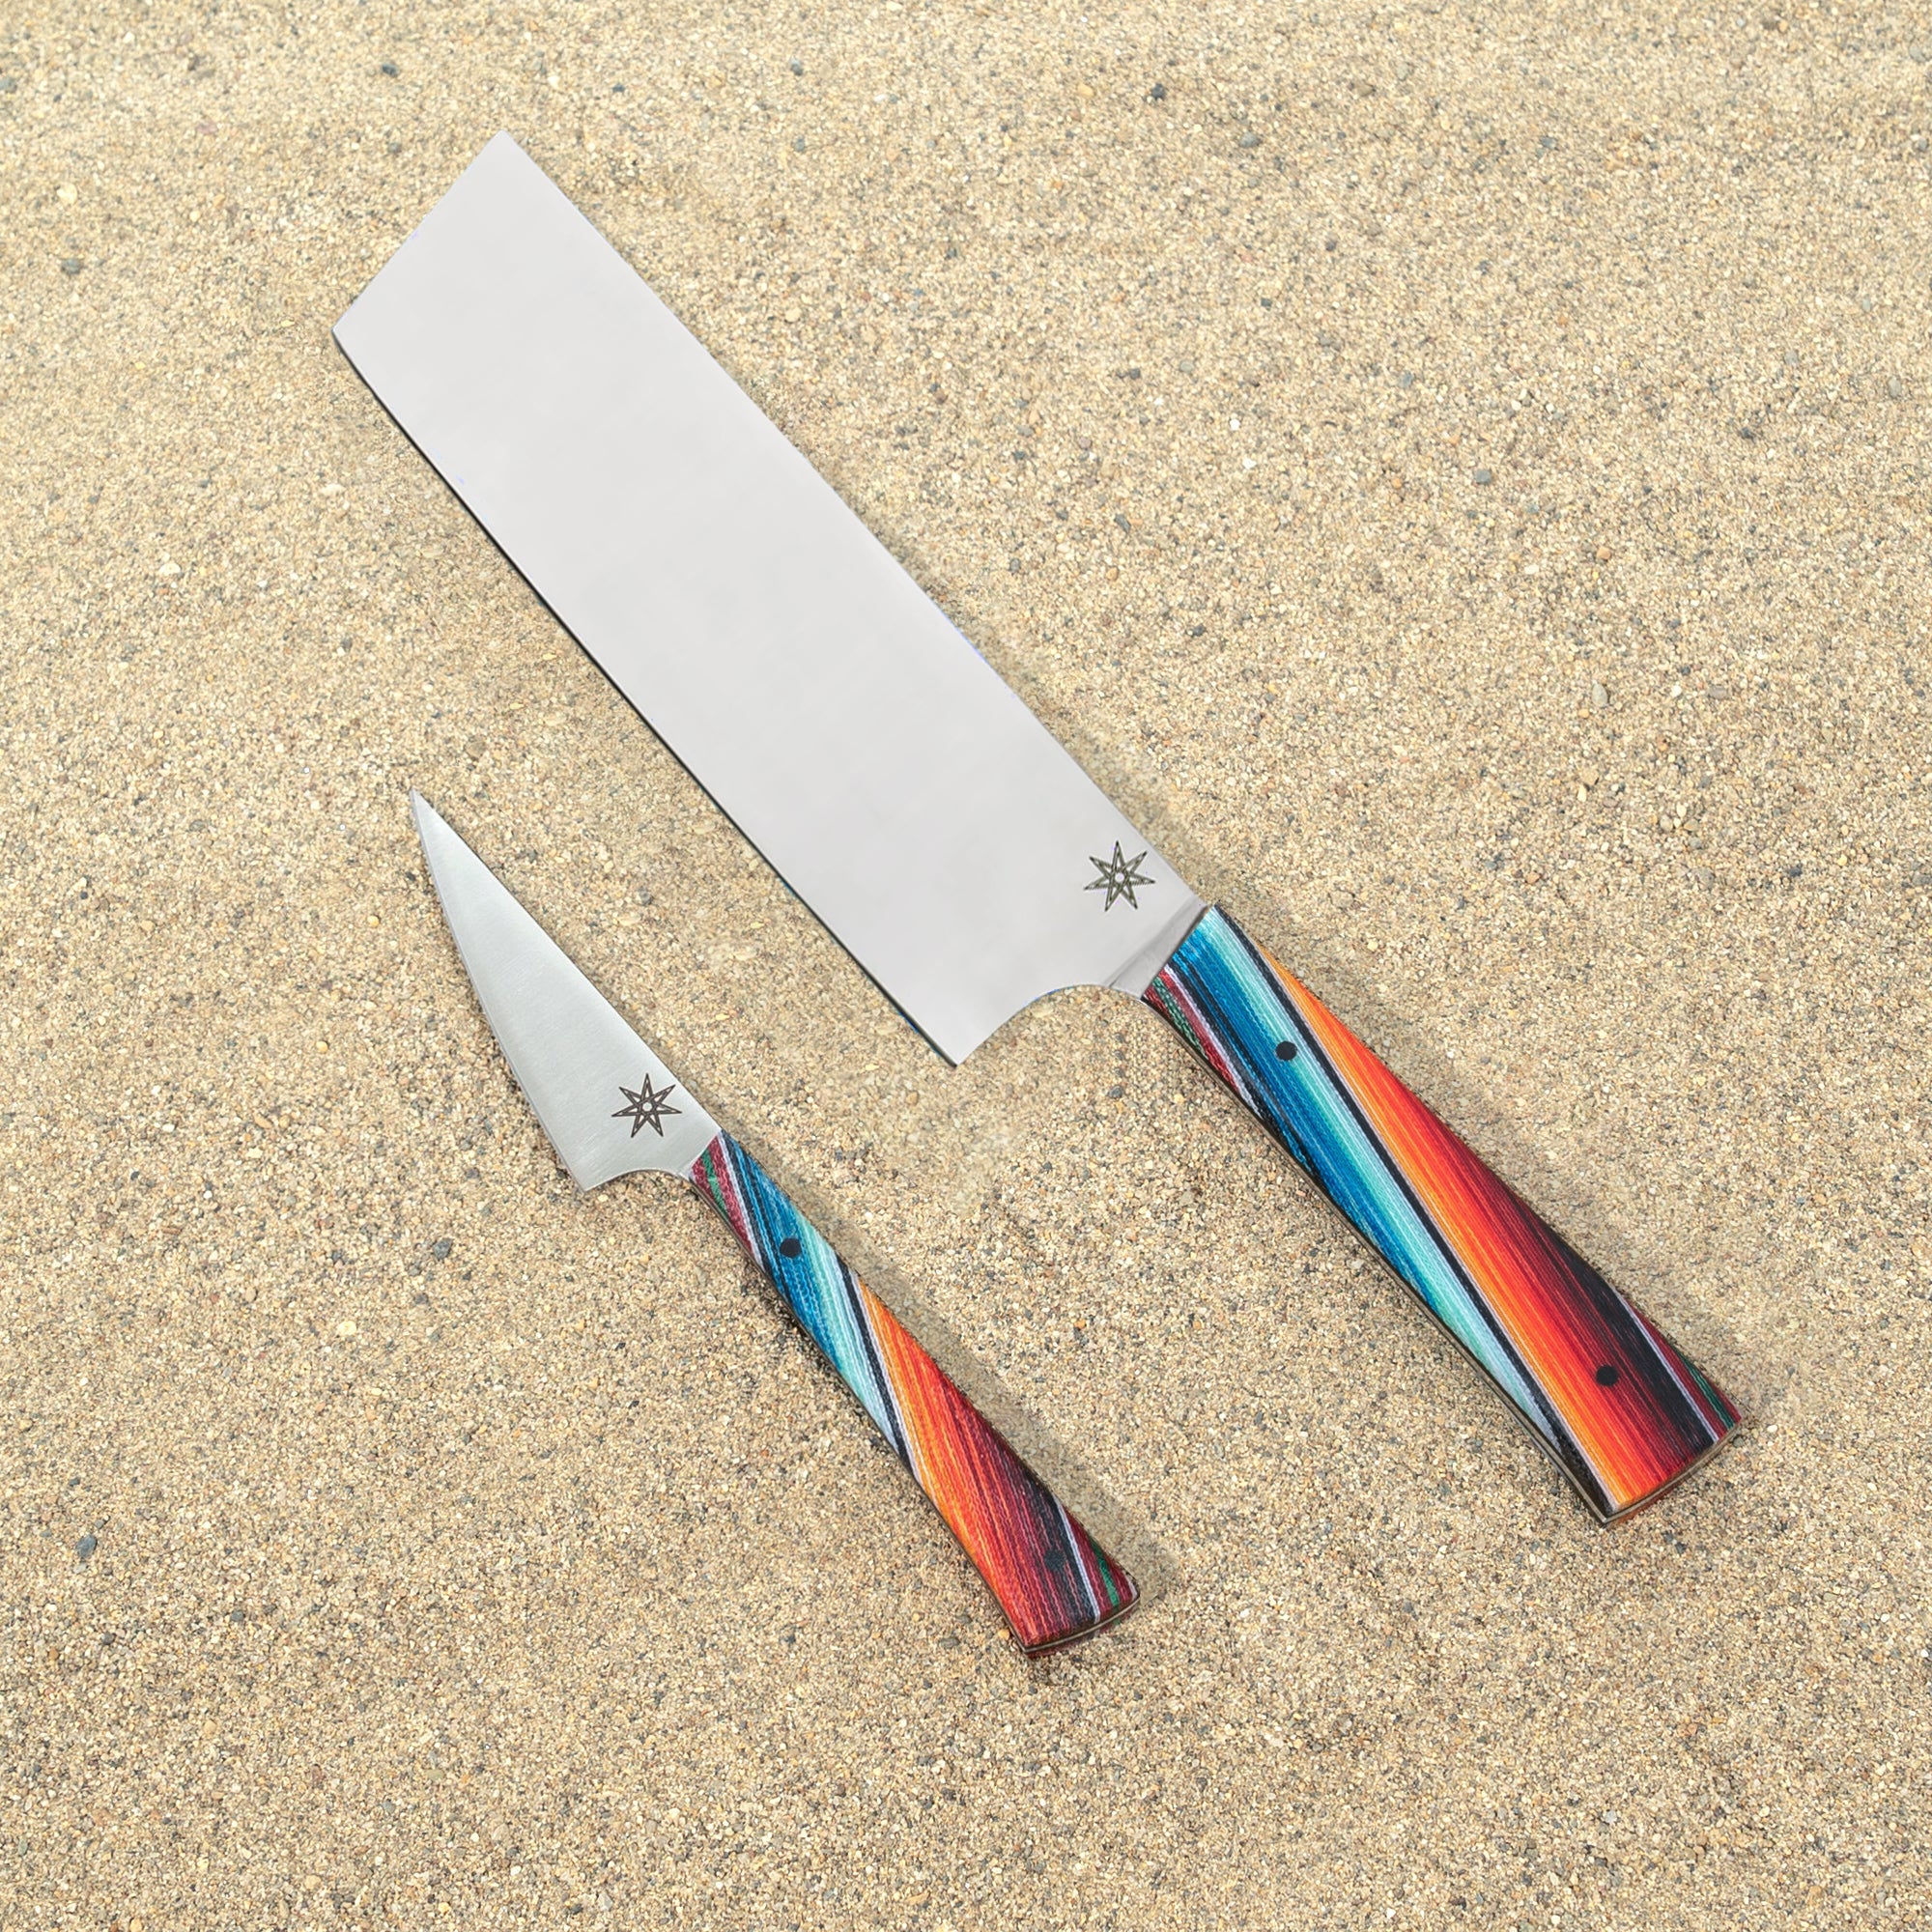 Baja Entremet Knife Set with two stainless steel kitchen knives made by Town Cutler. 3" Paring knife and 7" Nakiri  knife with colorful Mexican blanket pattern handles.